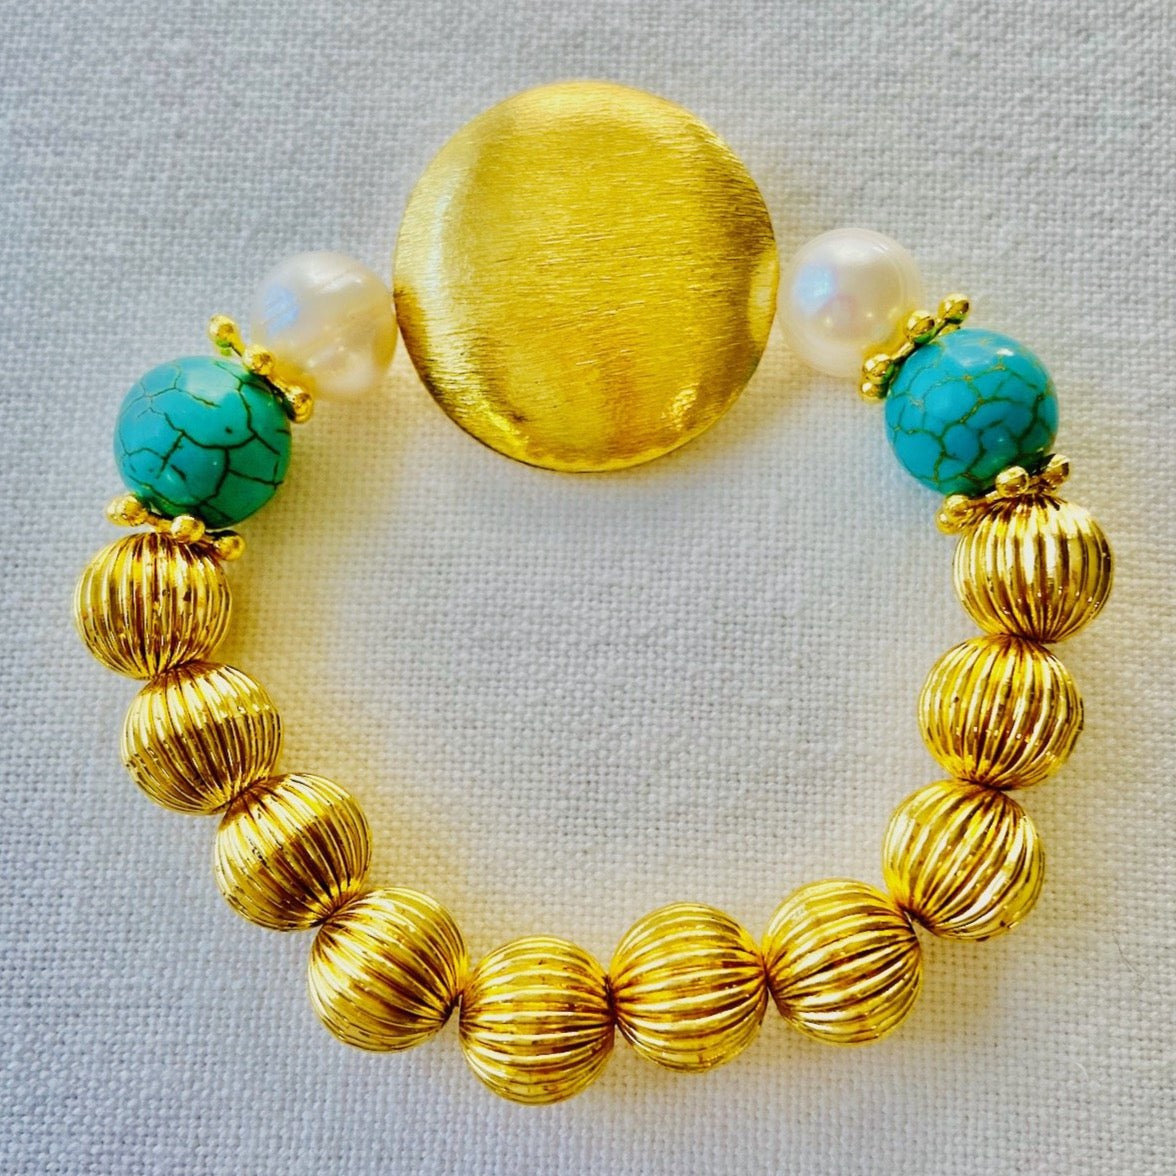 Blue Turquoise,  Baroque Pearls and 18k Gold Vermeil Bali Beaded Bracelet